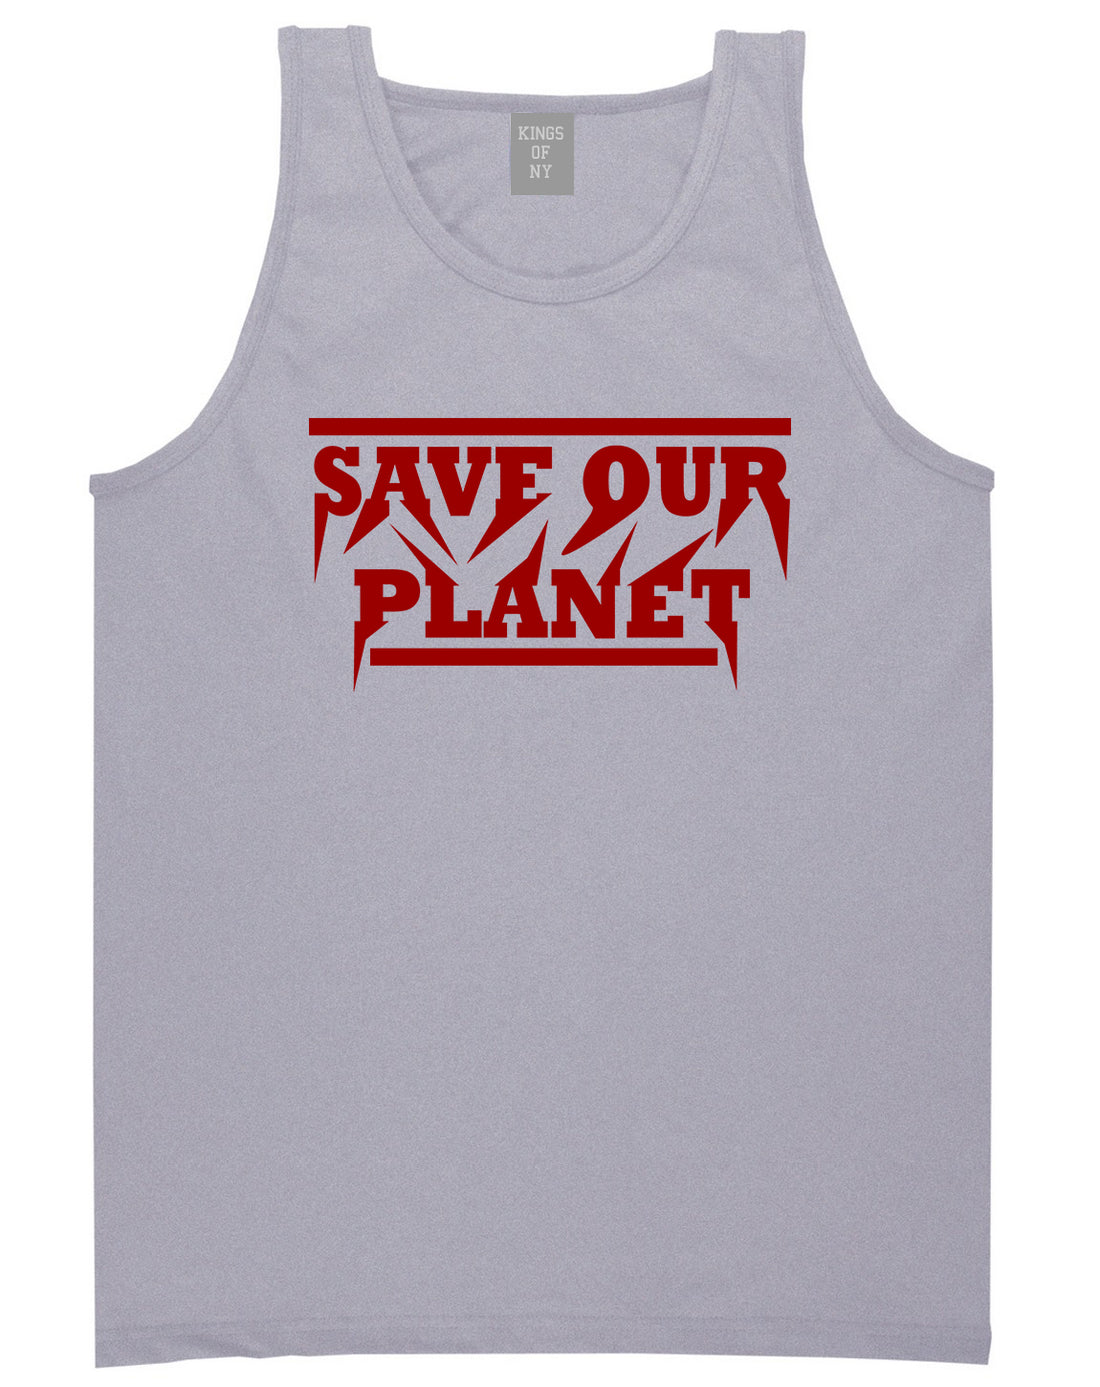 Save Our Planet Mens Tank Top Shirt Grey